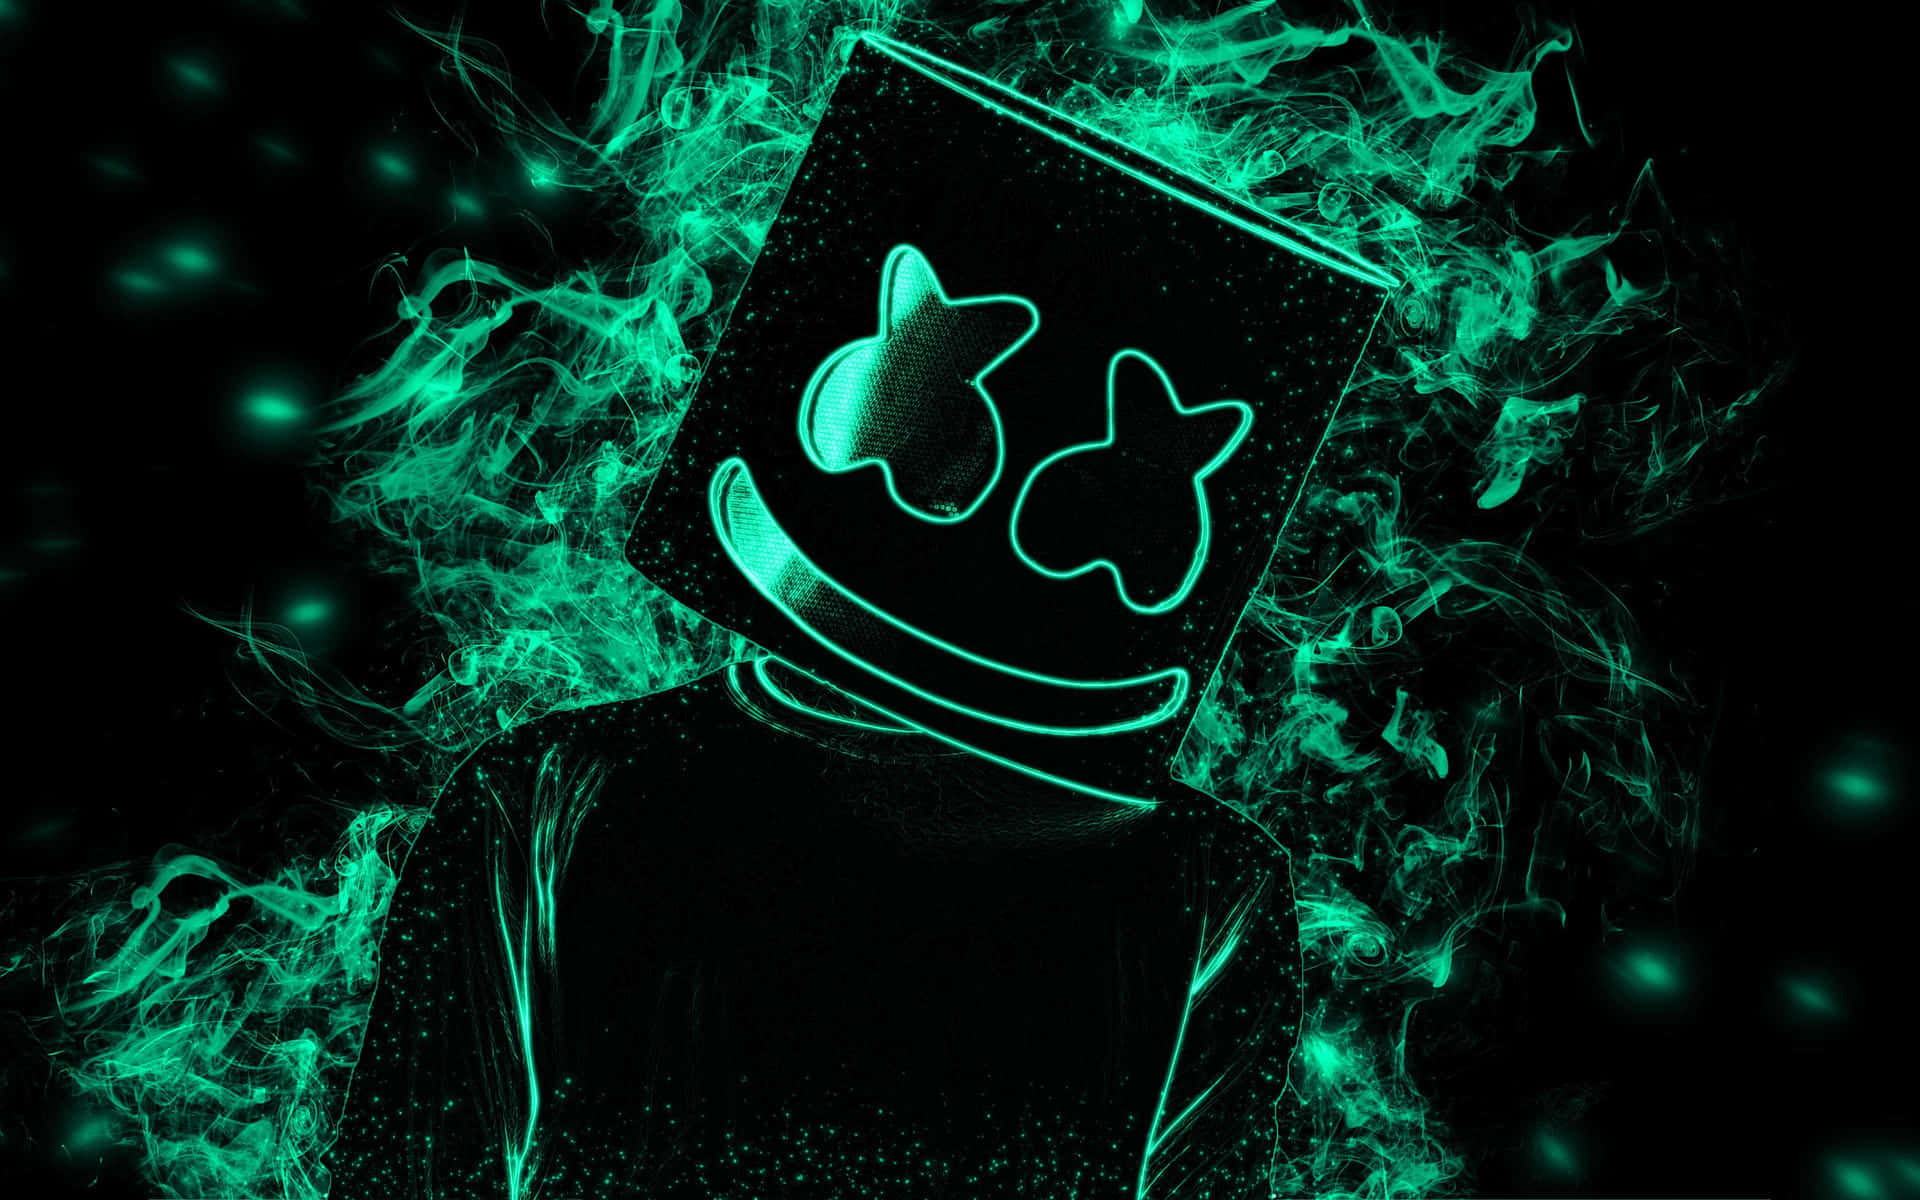 Marshmello lights it up in his iconic DJ style